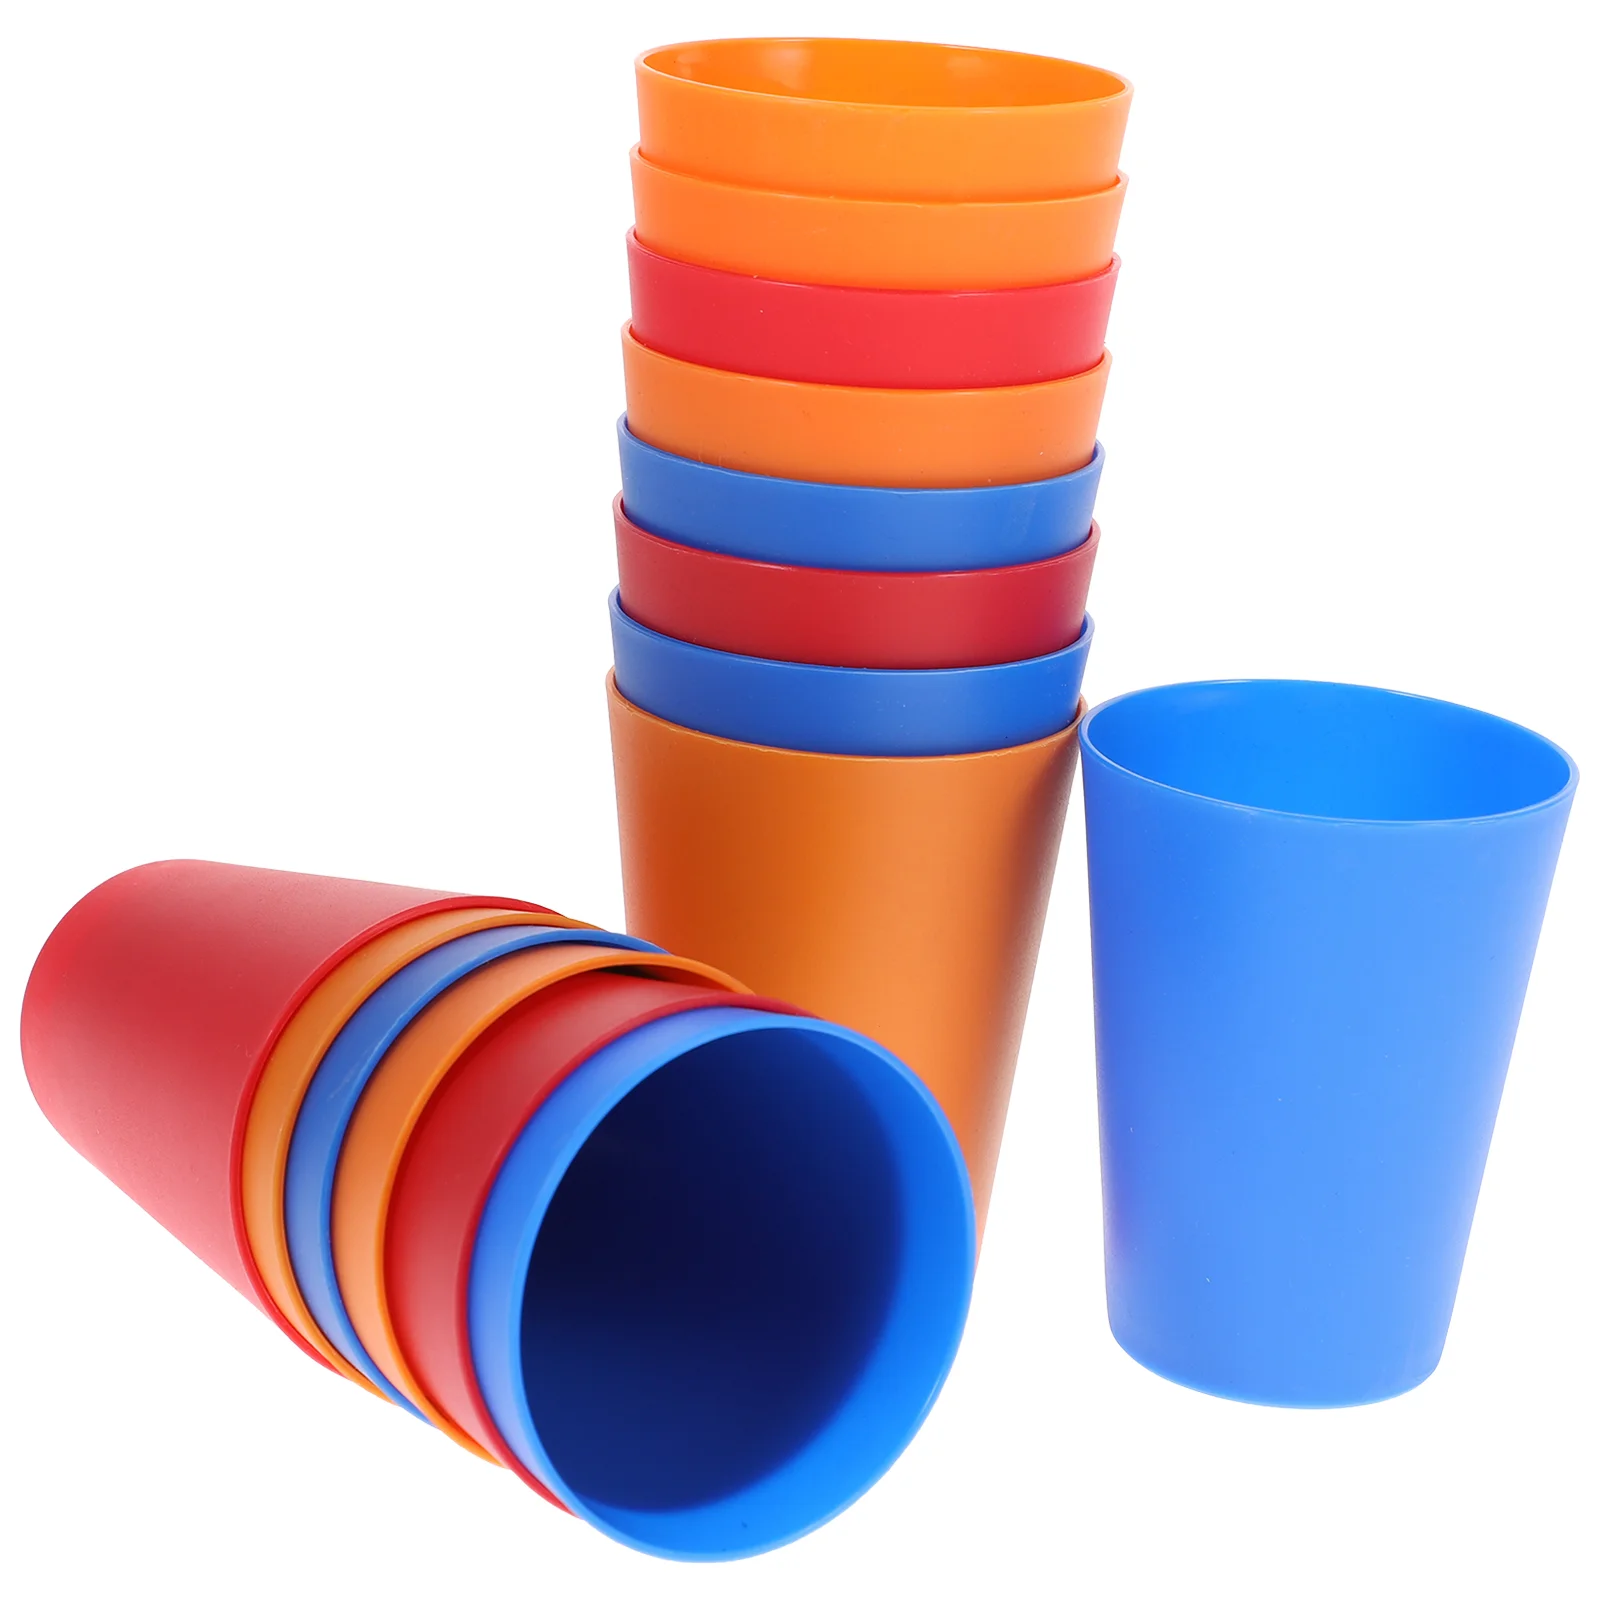 

15pcs Cups Reusable Water Cup Drinking Cups Cups for Party Supplies 101- 200ml ( Mixed Color )